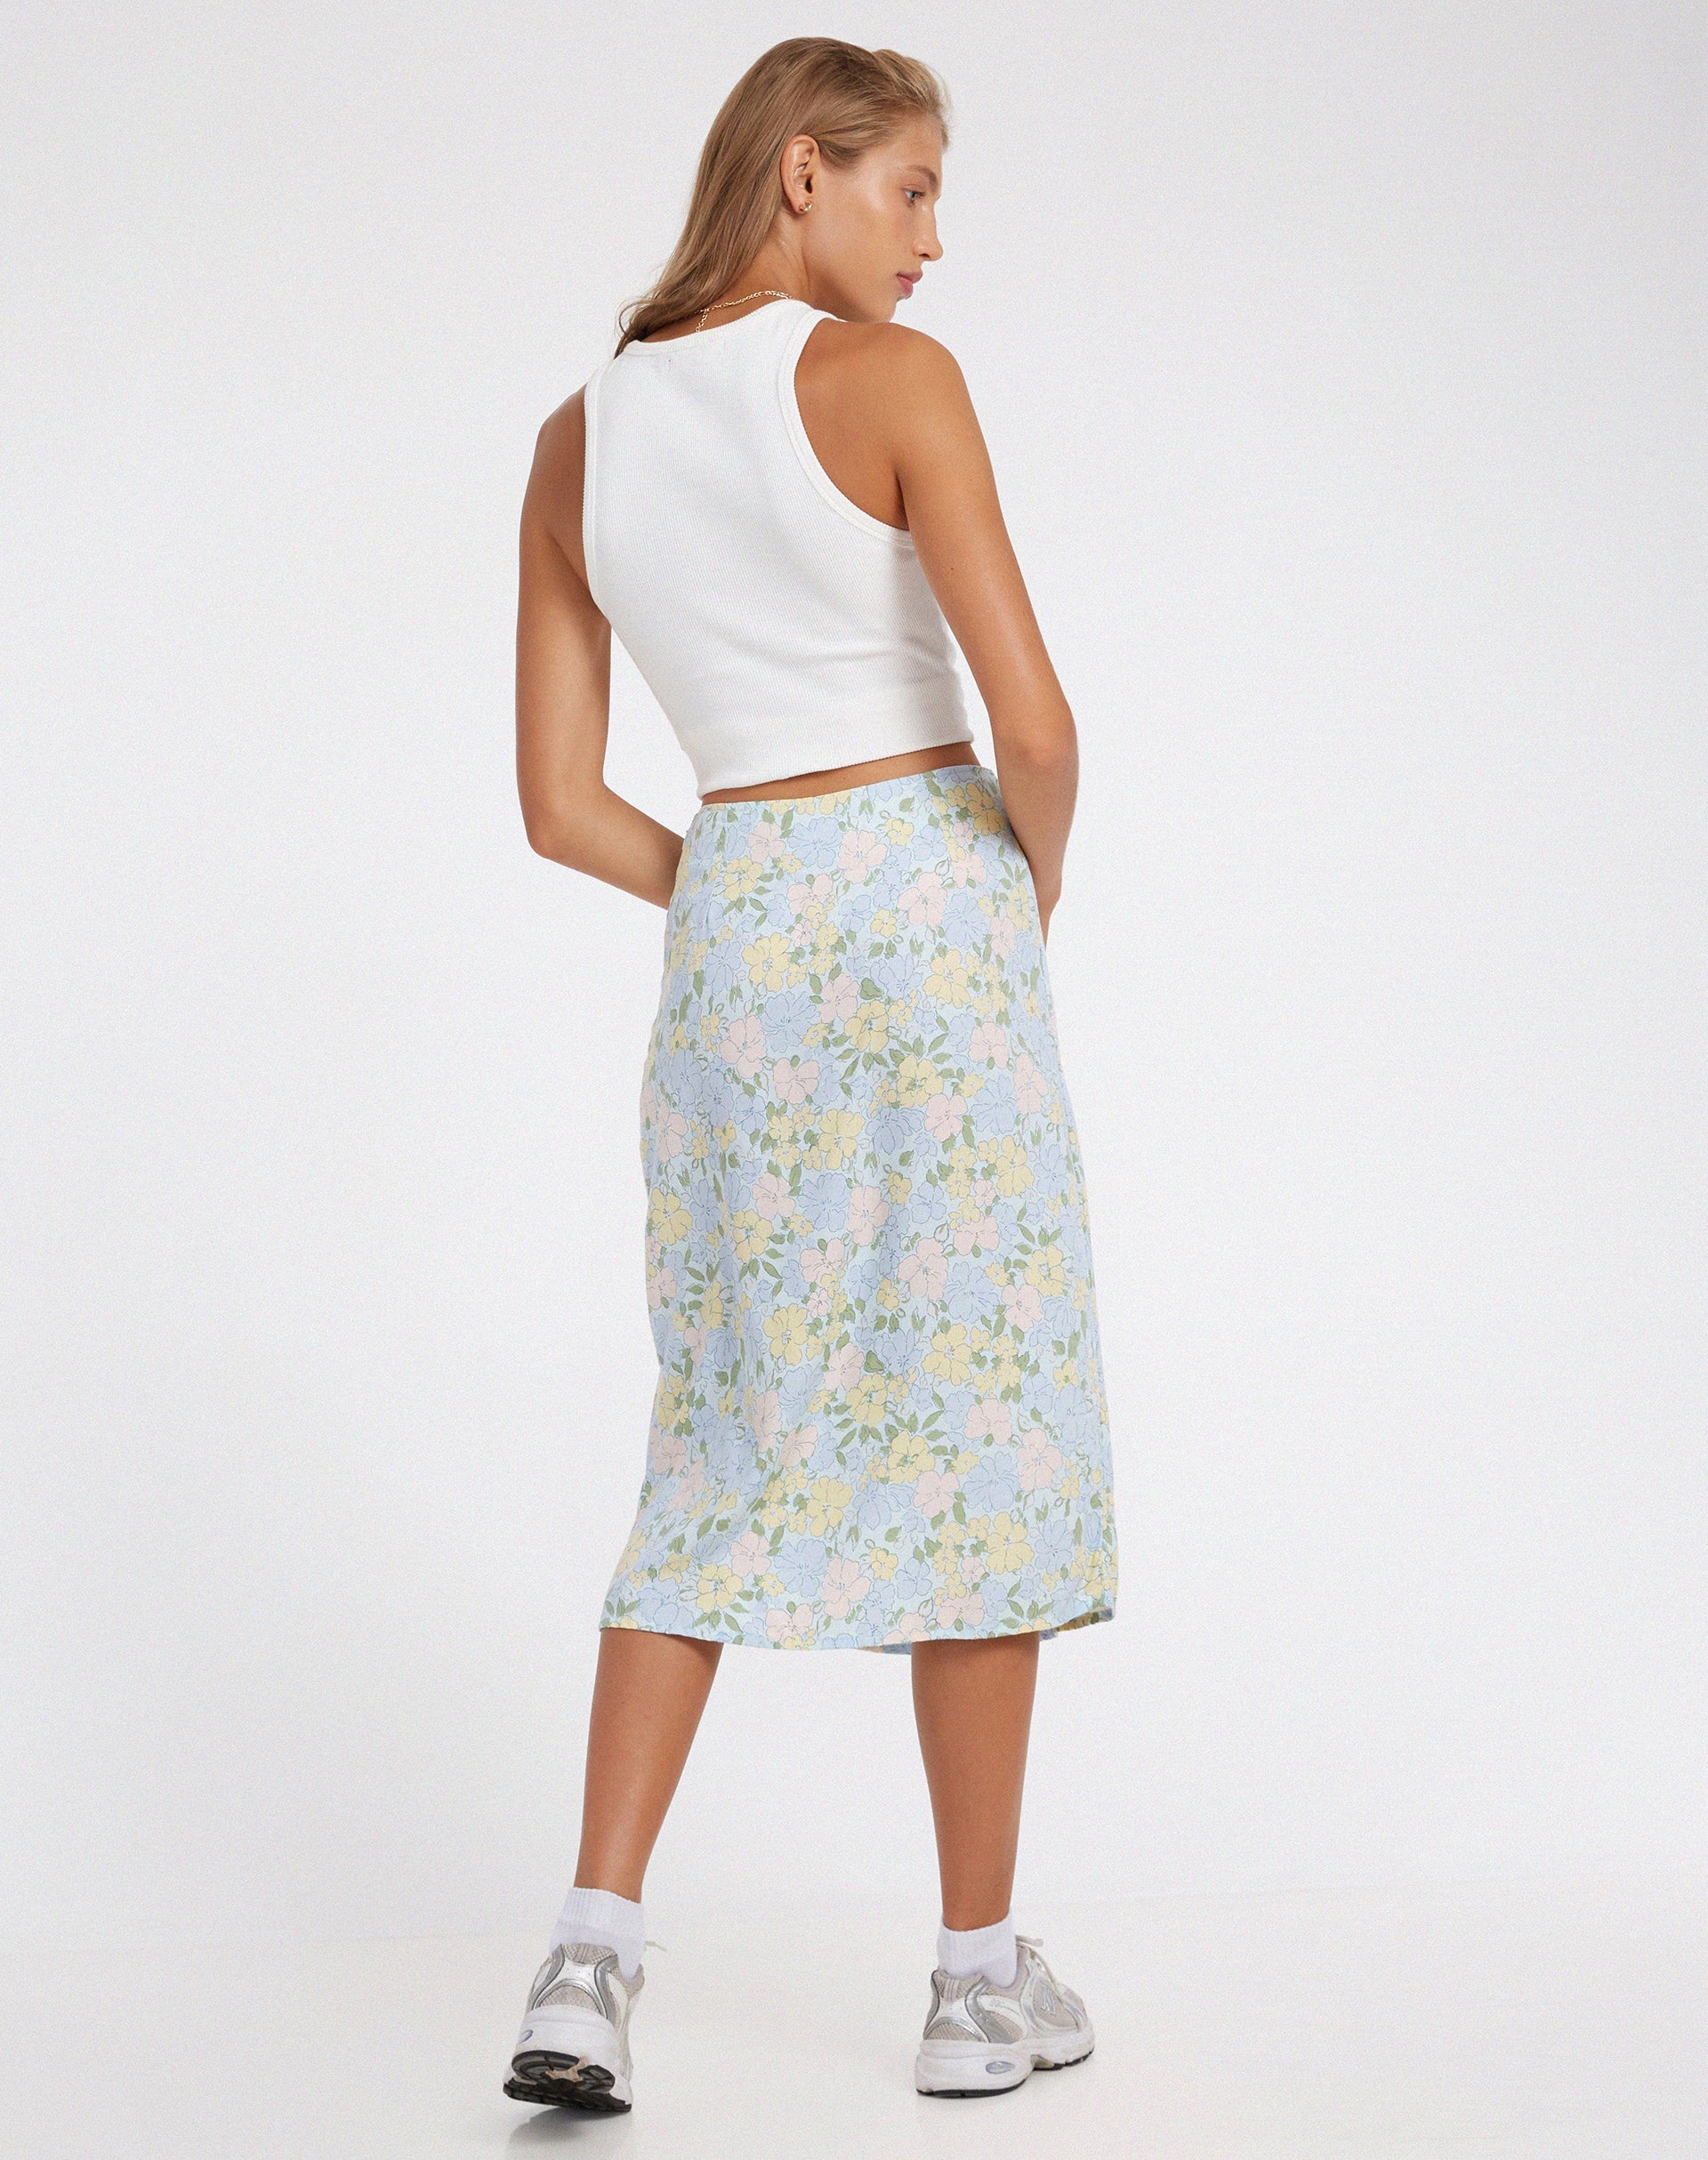 Image of Seko Midi Skirt in Washed Out Pastel Floral